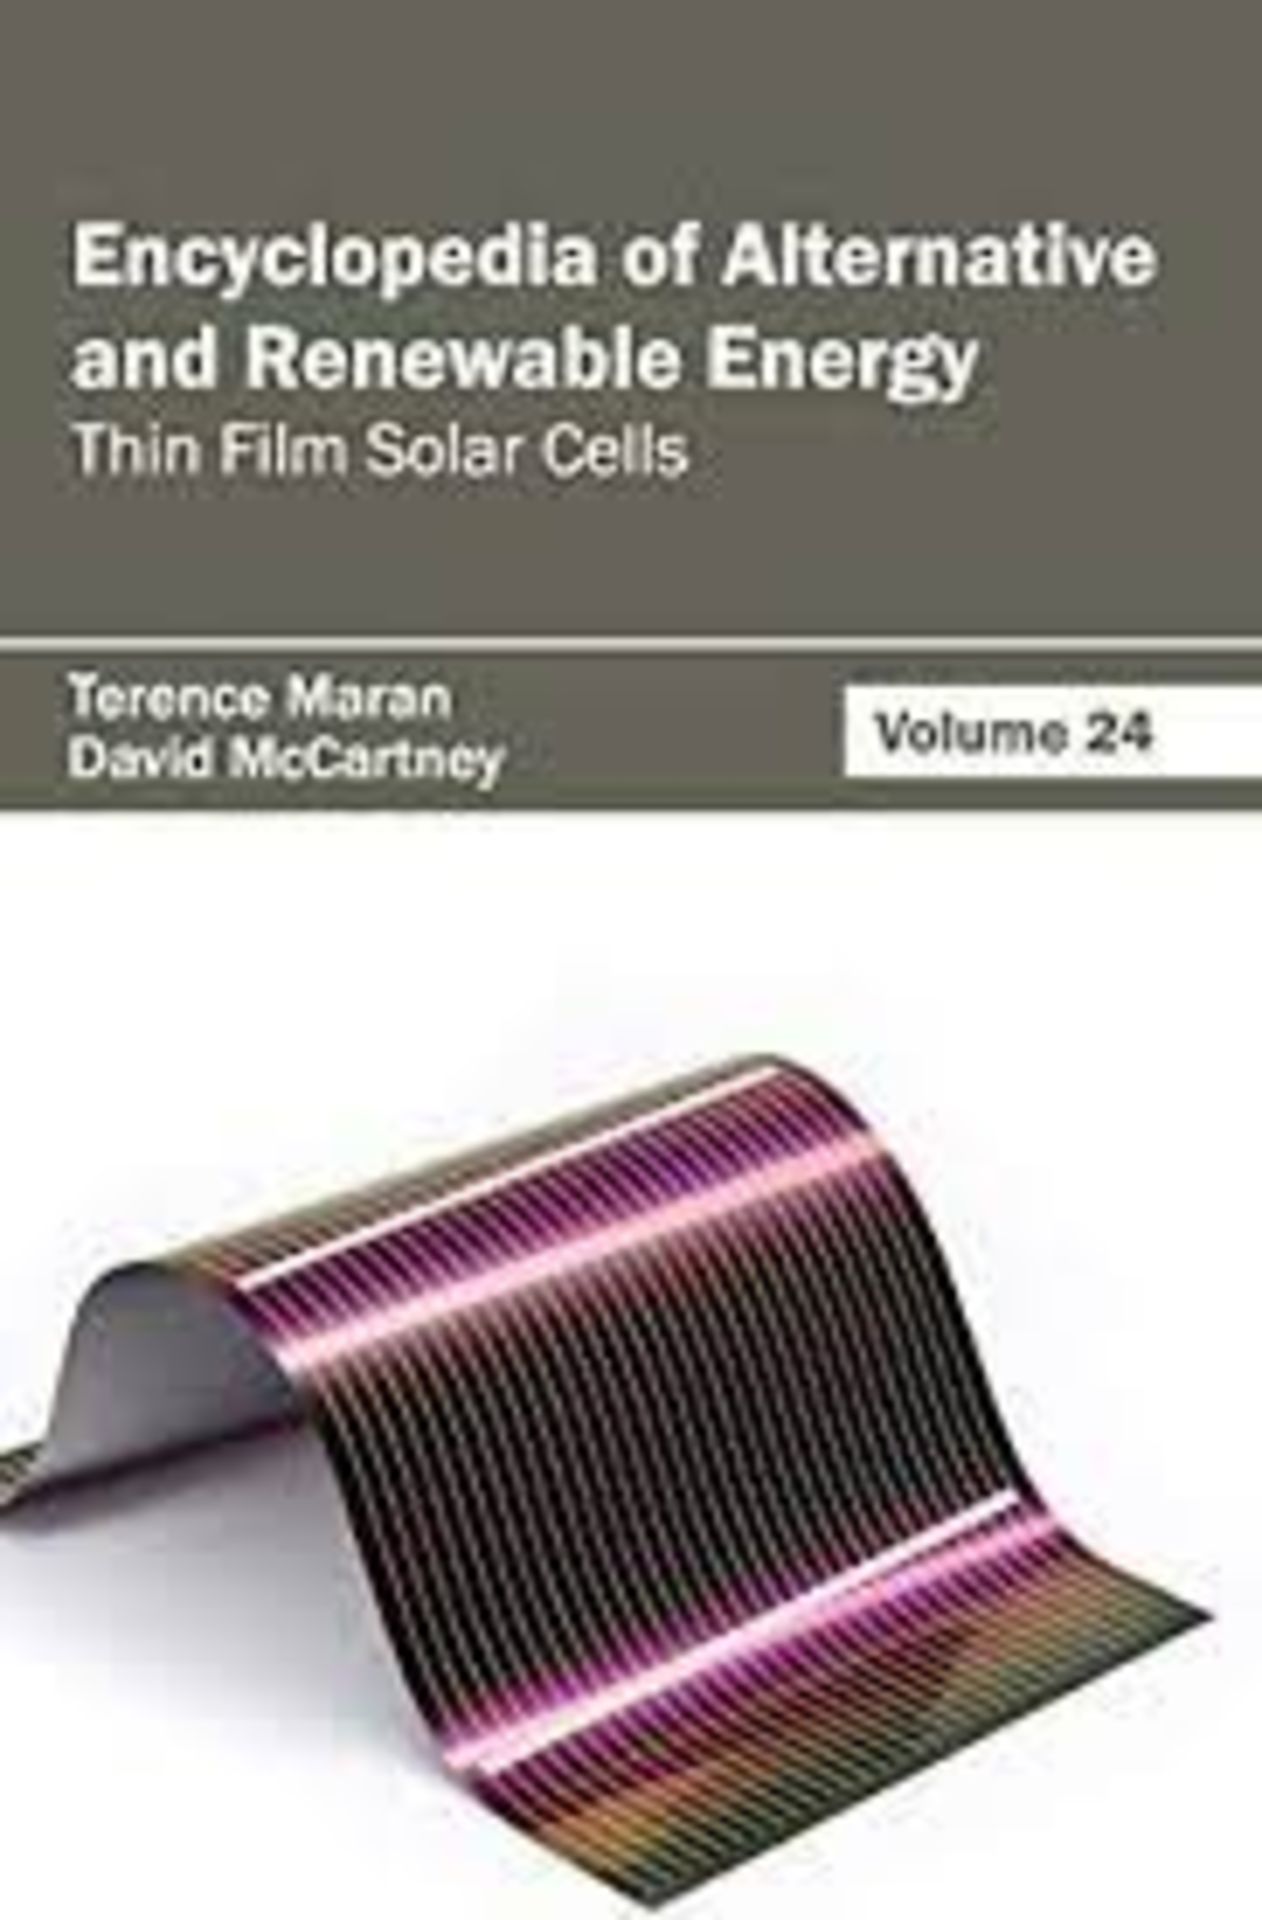 RRP £1842 (Approx. Count 25)(B22) spW50H0997e 1x Encyclopedia of Alternative and Renewable Energy: